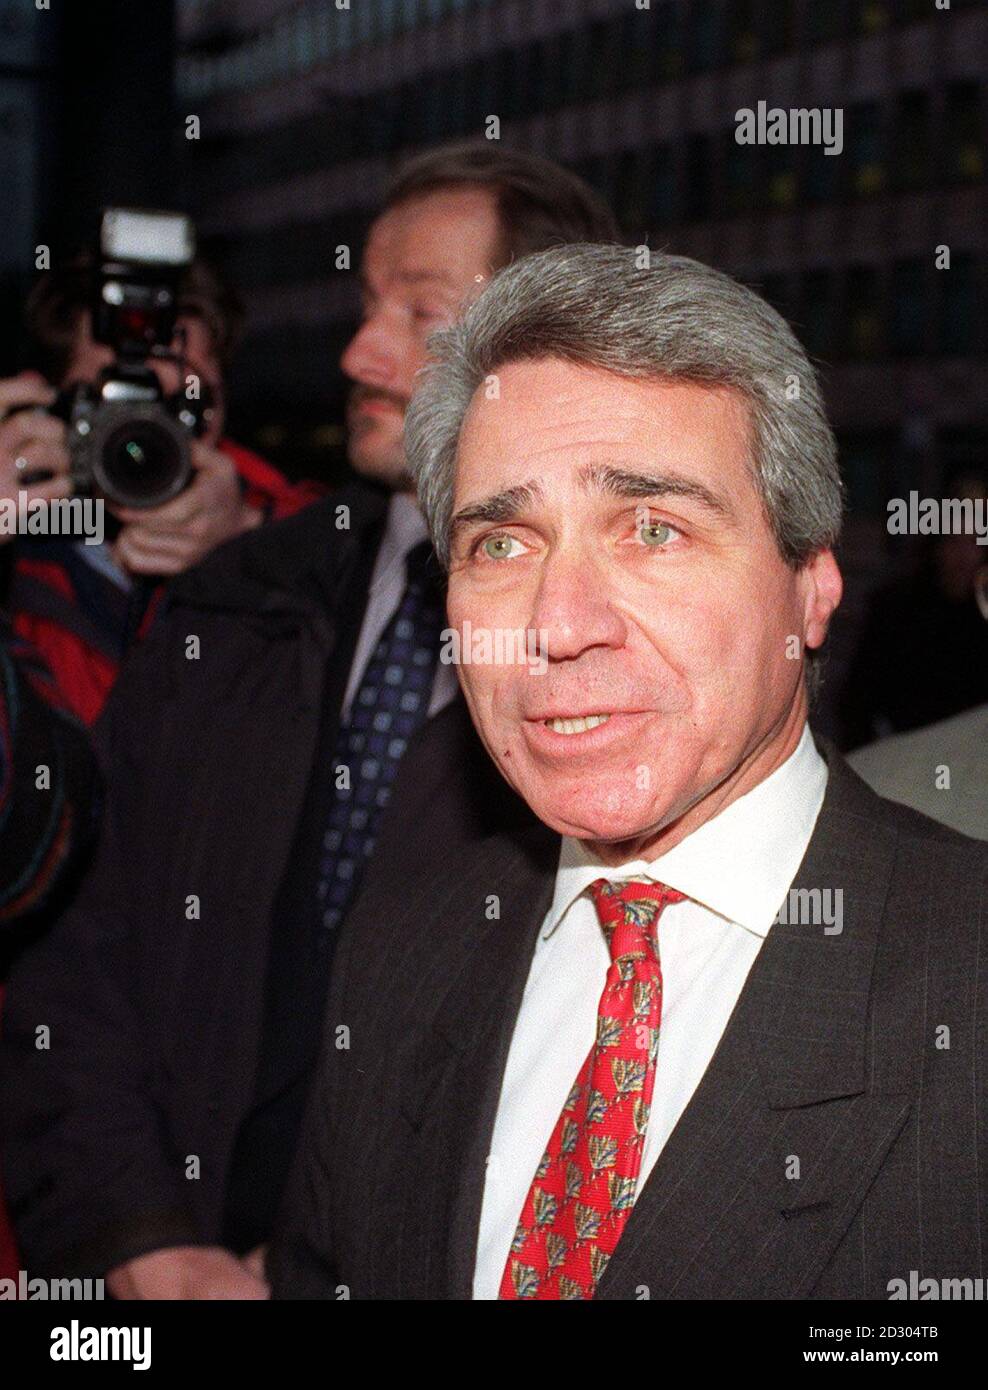 The American Ambassador Phil Lader summoned to the Department of Trade and Industry in London to explain his country's actions on bananas to Trade Secretary Stephen Byers.   * 21/2/2001:  Phil Lader, who is due to dine with  The Queen and Duke of Edinburgh, before returning to the United States at the end of the month to be replaced by a nominee chosen by new US President George W Bush. Stock Photo